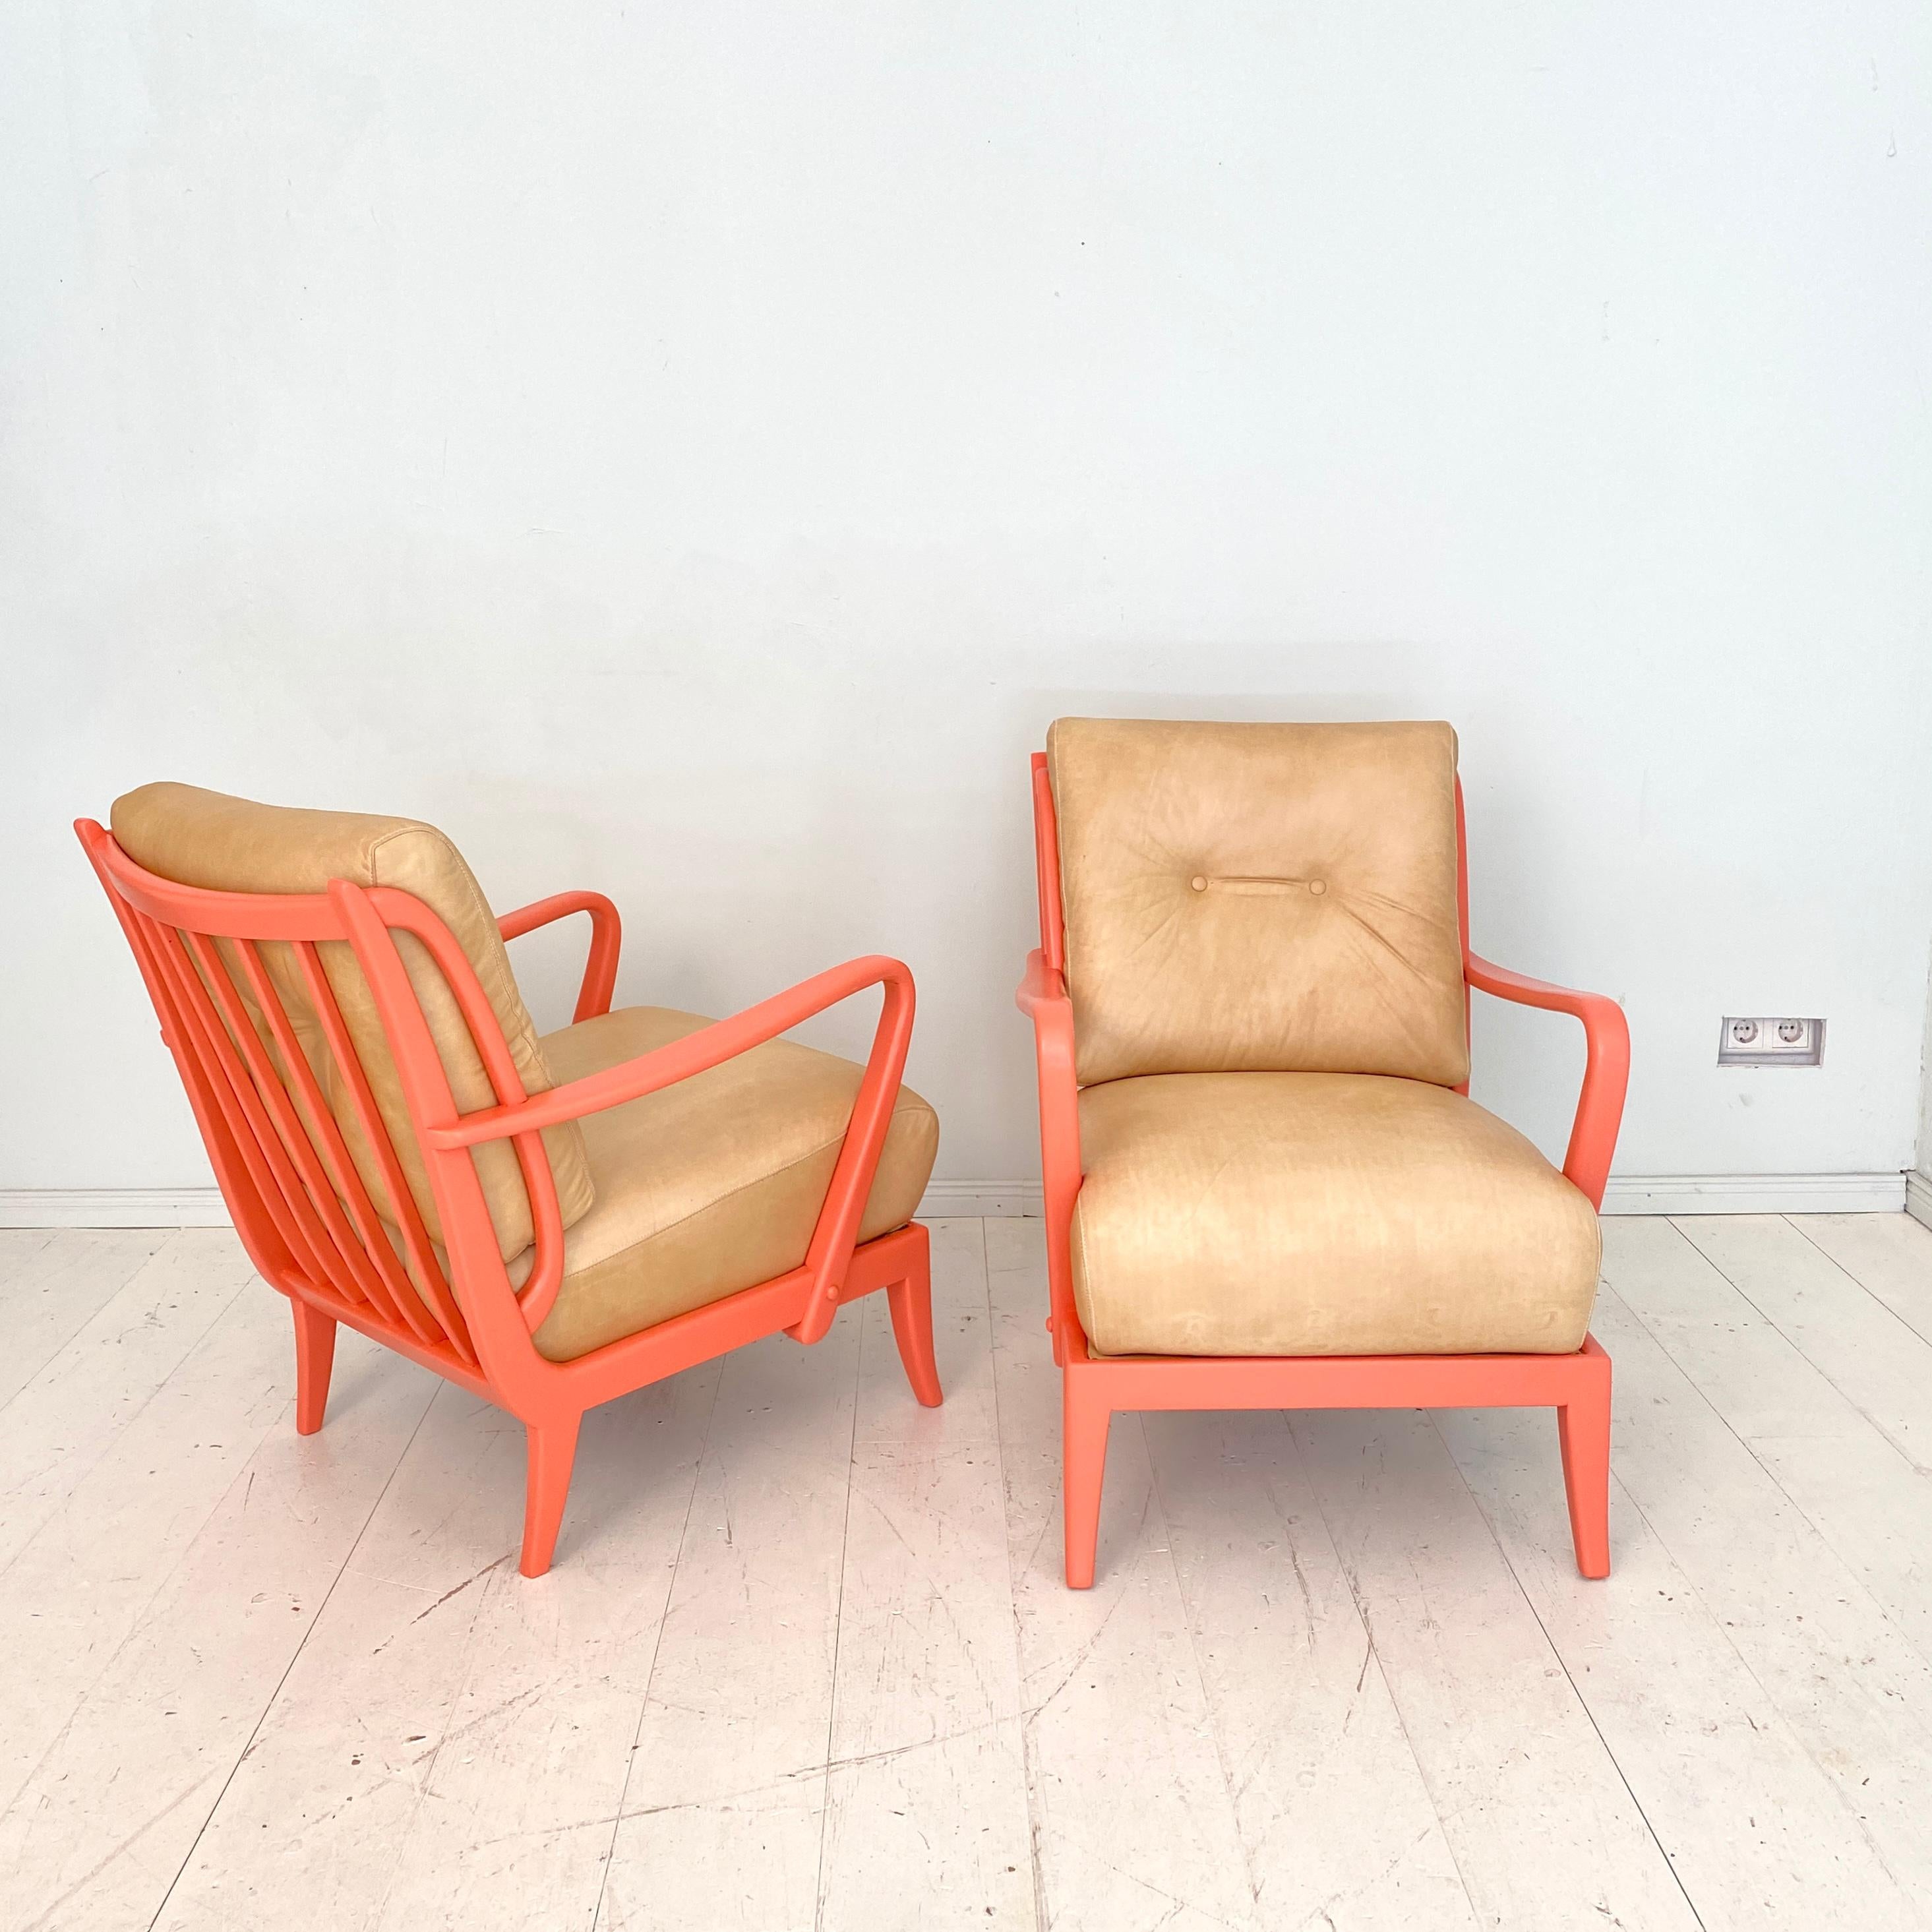 Lacquered Pair of Italian Mid Century Lounge Chairs in Coral Color and Beige Leather, 1950